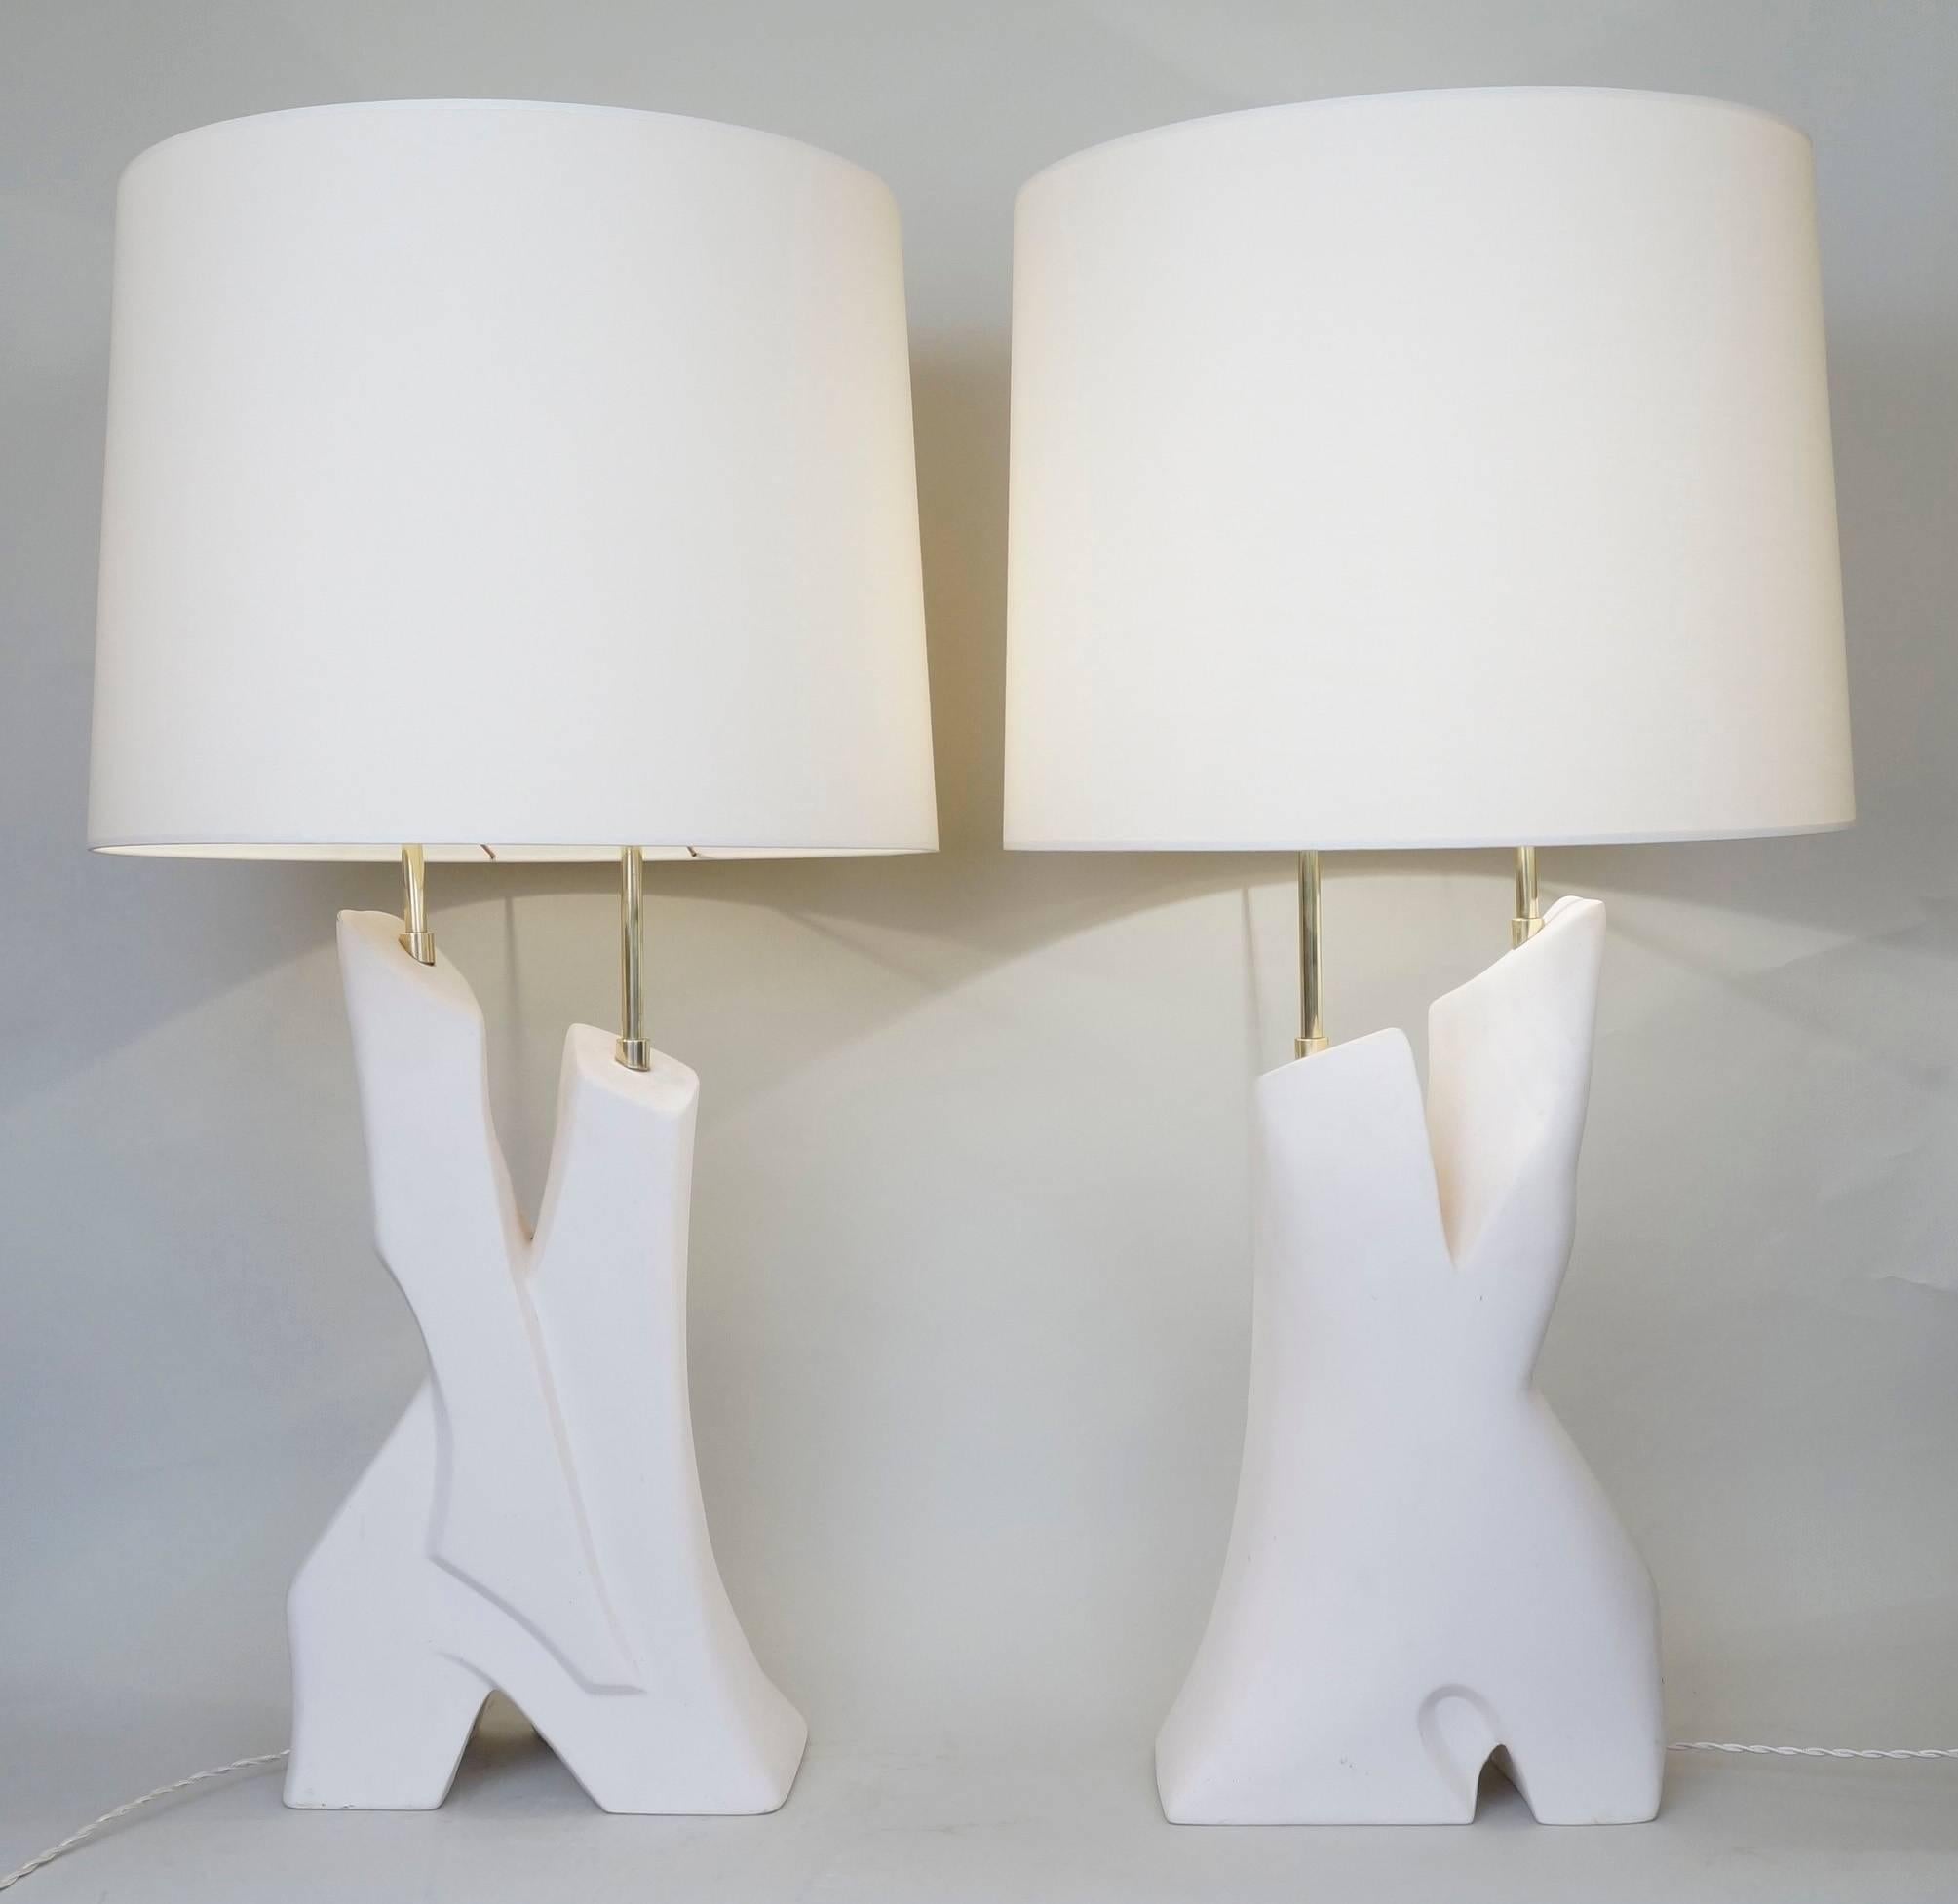 Important pair of un-enameled ceramic table lamps, signed Dorion, manufacture of Desvres.
custom-made fabric lampshades.
Rewired with twisted silk cord. 
US standard plug on request.
Measures: Ceramic height: 49 cm - 19.3in. 
Height with